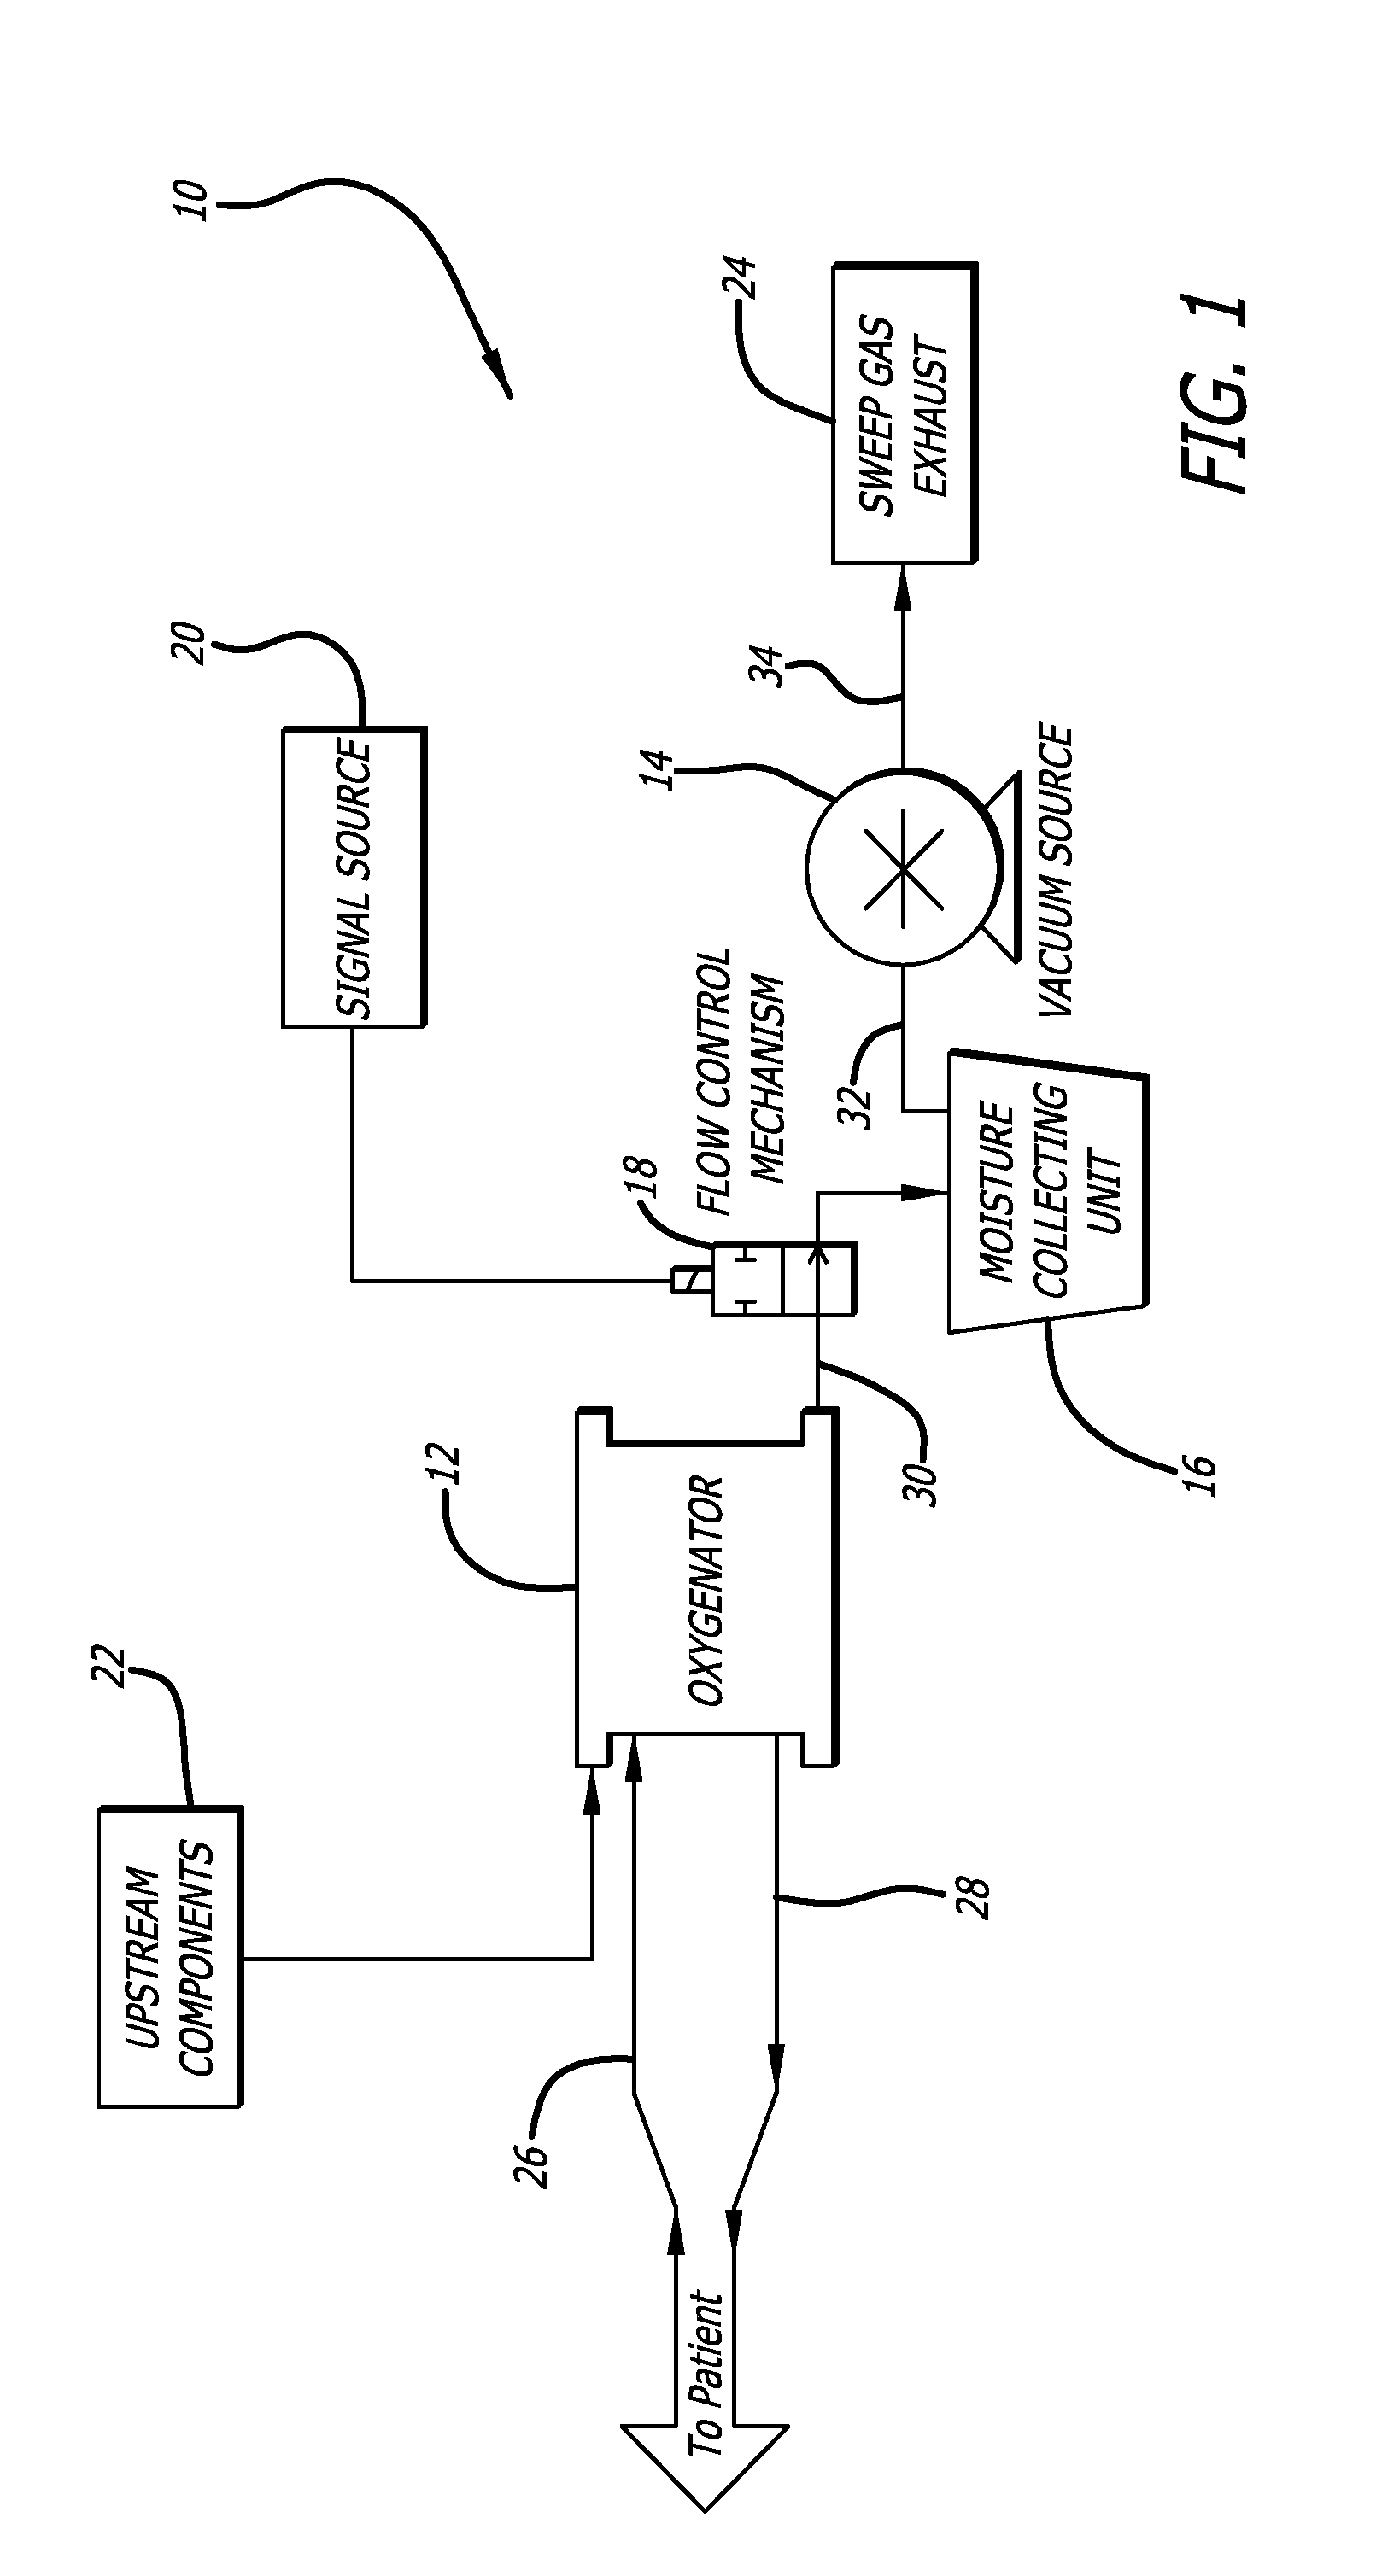 Method and system for purging moisture from an oxygenator